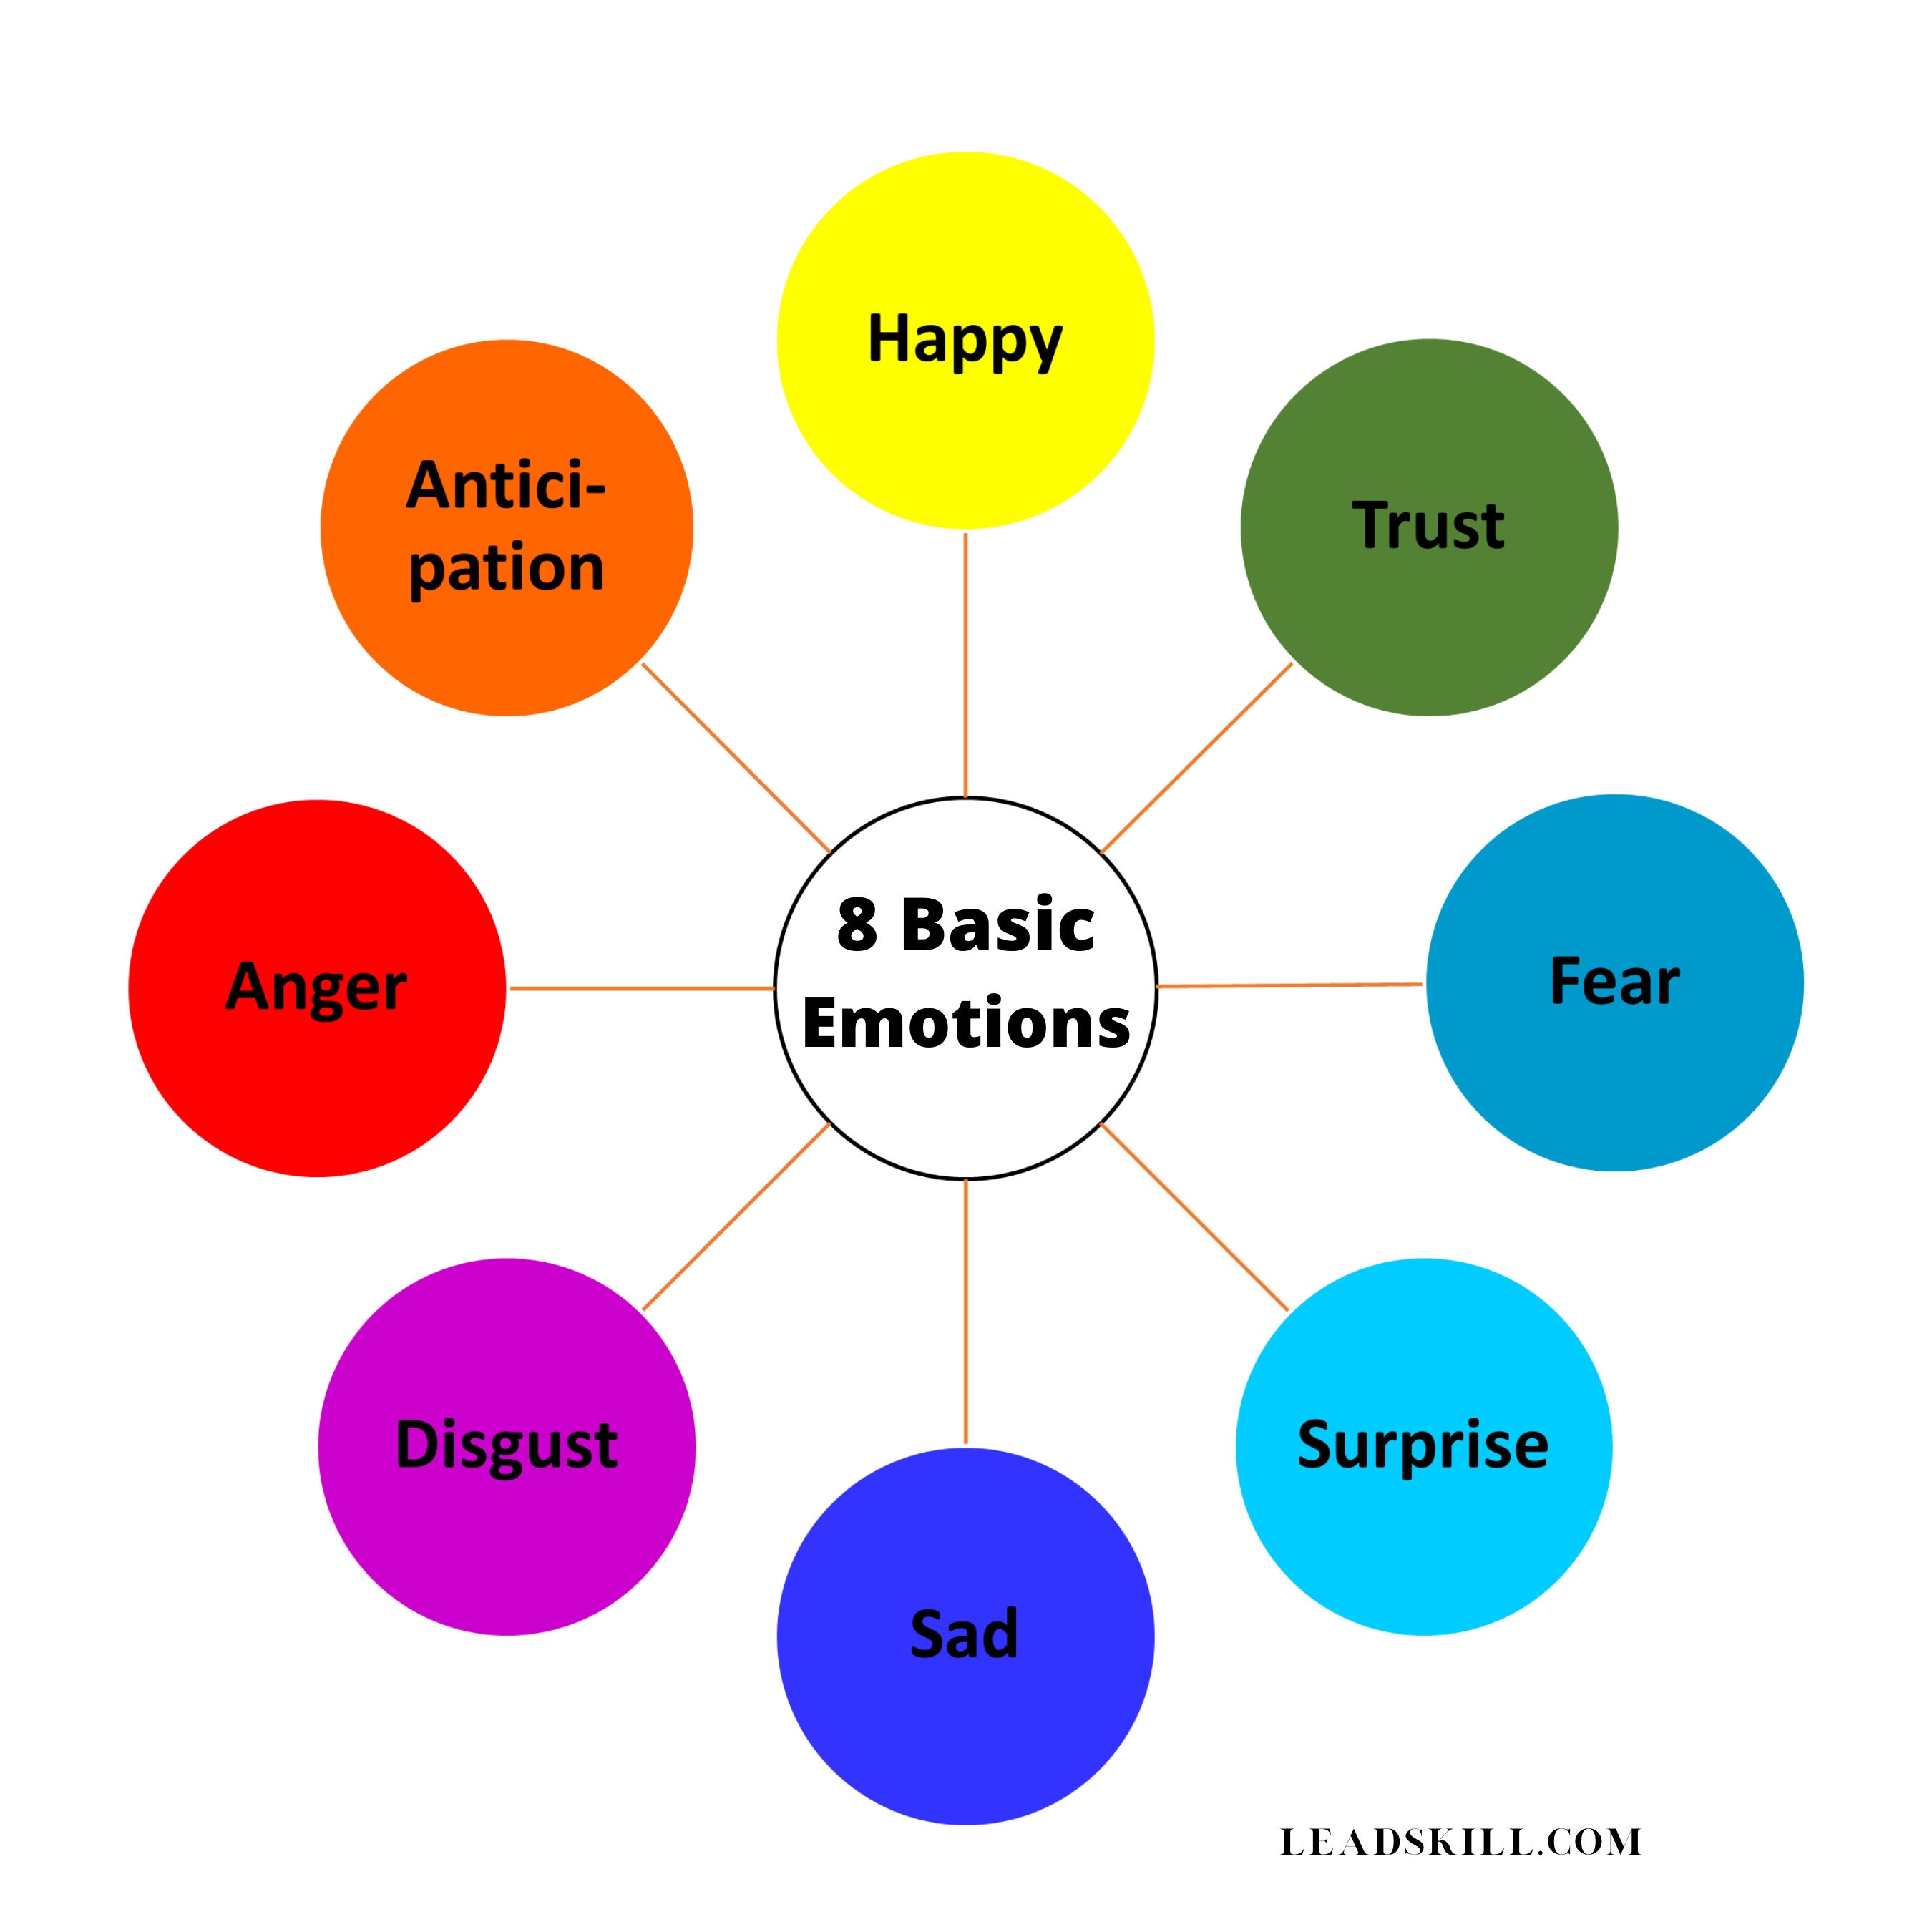 The 6 Types of Basic Emotions